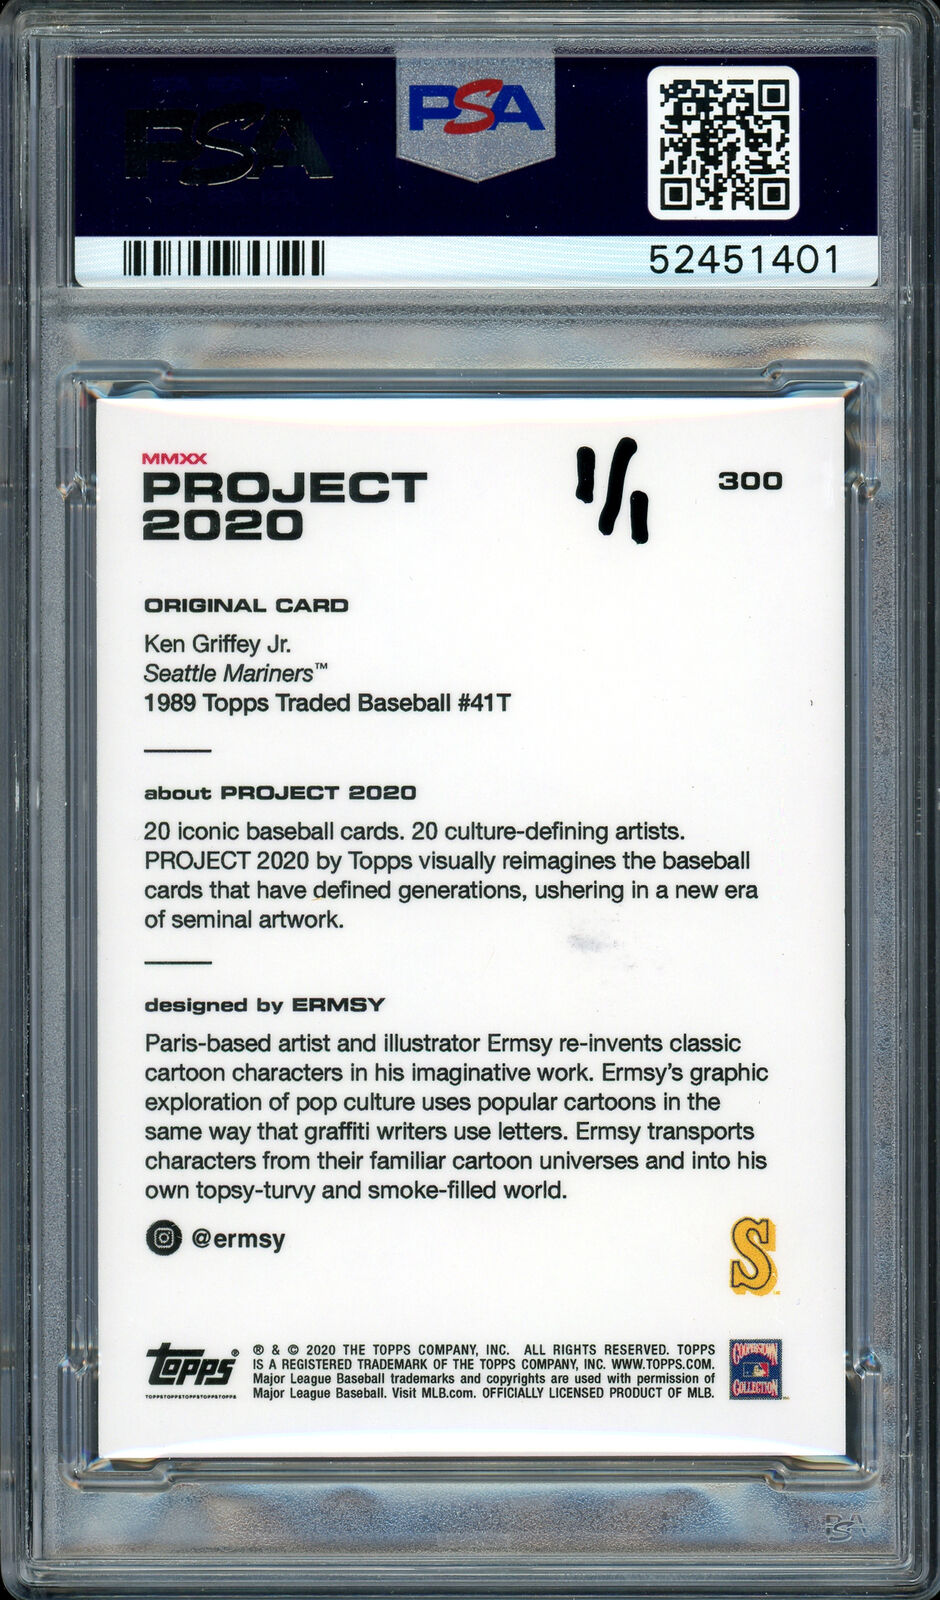 Ken Griffey Jr. Auto Topps Project 2020 Ermsy Card "13x AS" #1/1 PSA 52451401 Image 5